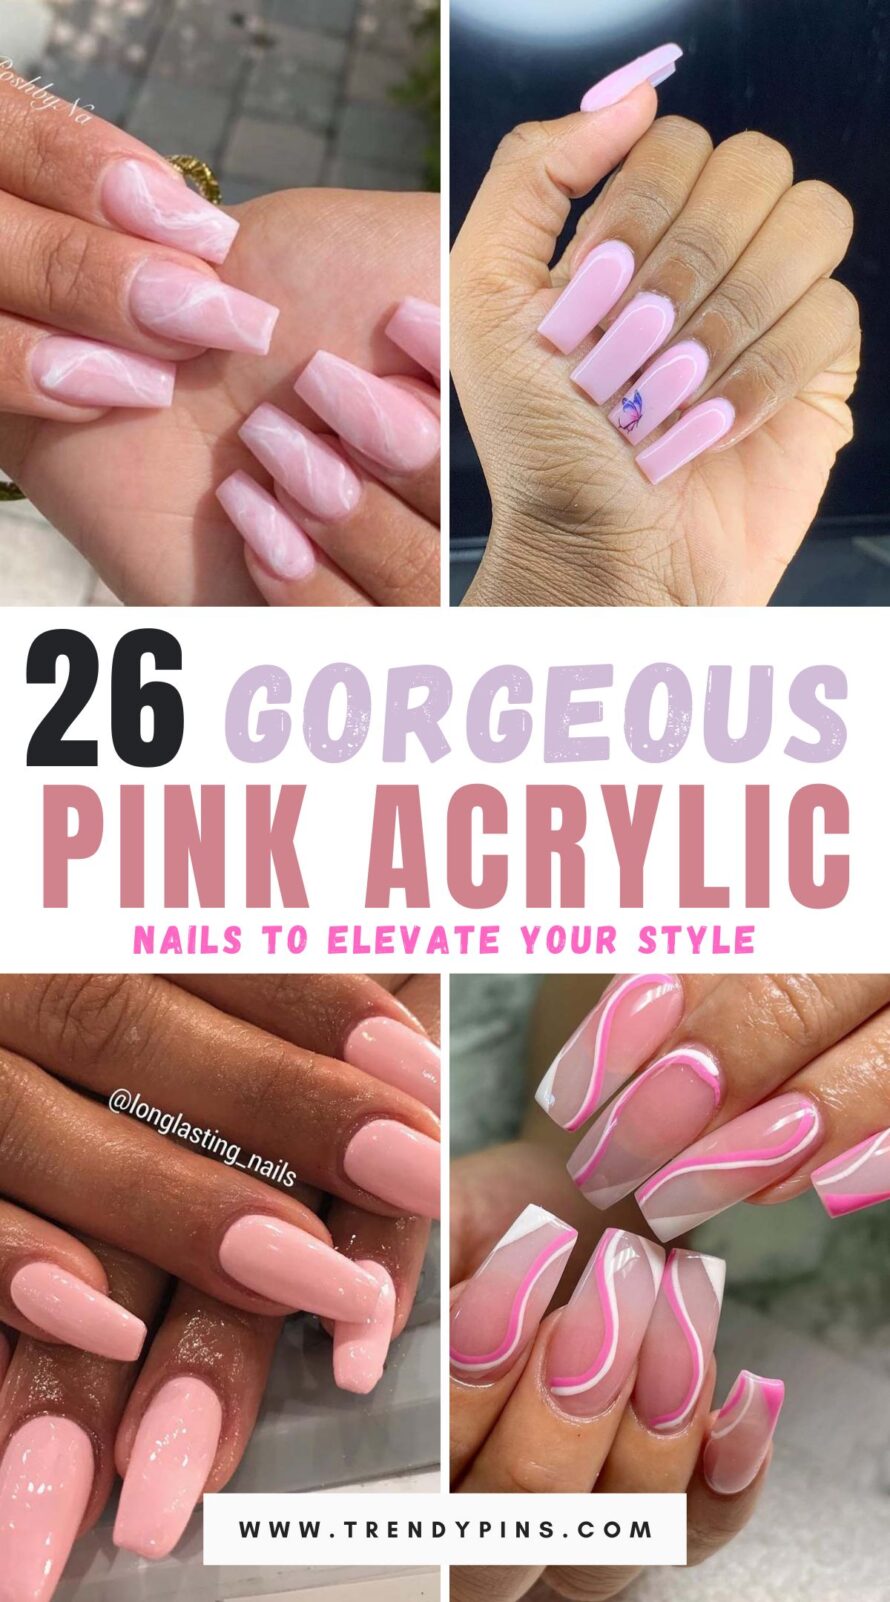 Dive into a world of pink with 26 gorgeous acrylic nail designs. Perfect for any occasion, these styles are a must-try for a chic look.